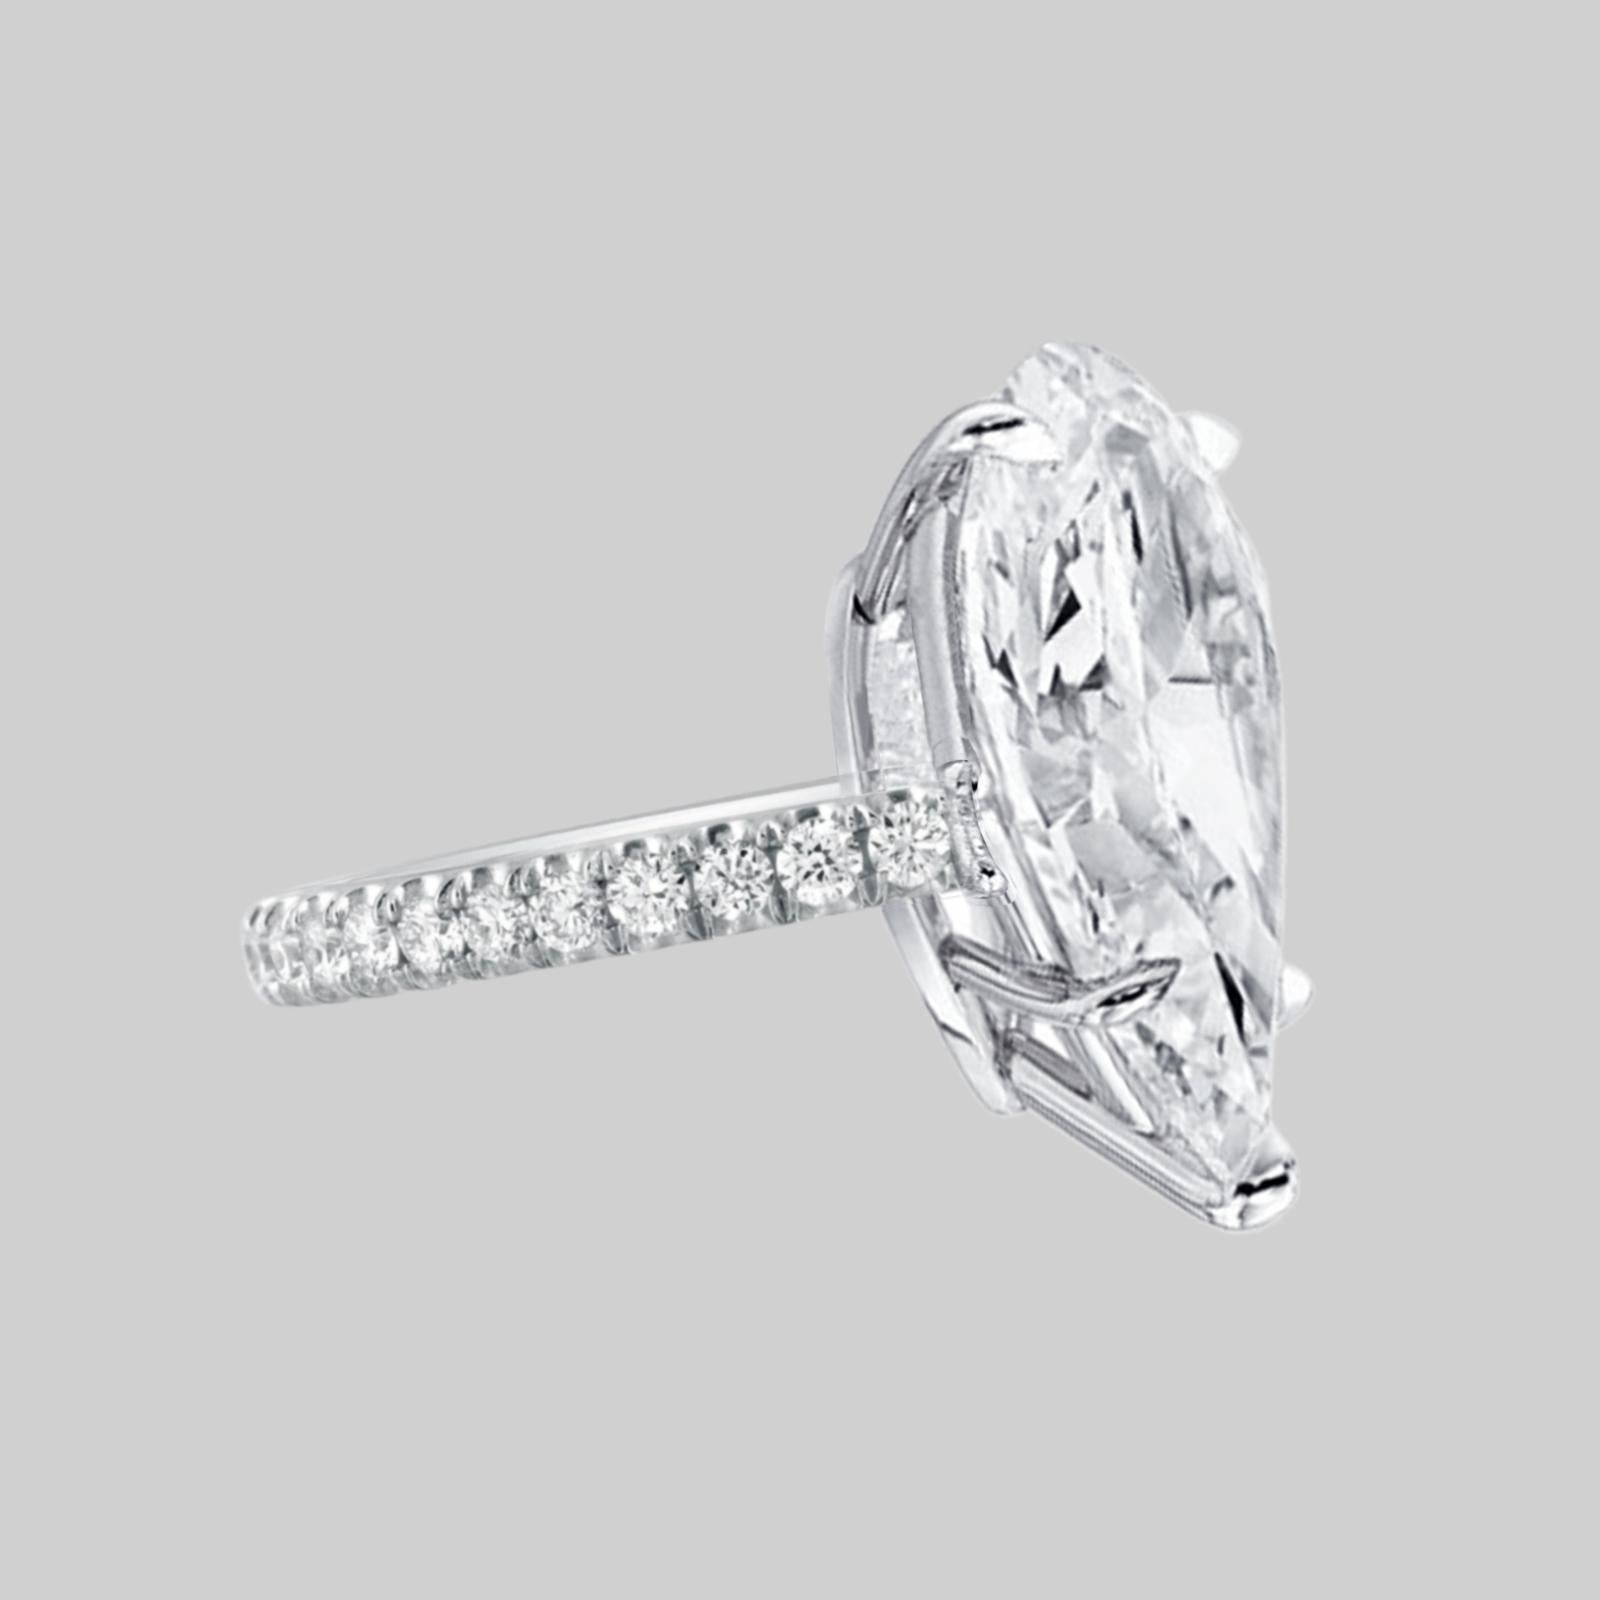 This exquisite ring, featuring a GIA-certified pear-shaped diamond, is a perfect blend of elegance and modern design.

**Center Diamond:**  
The centerpiece of this sophisticated ring is a stunning 5-carat pear-shaped diamond, a testament to